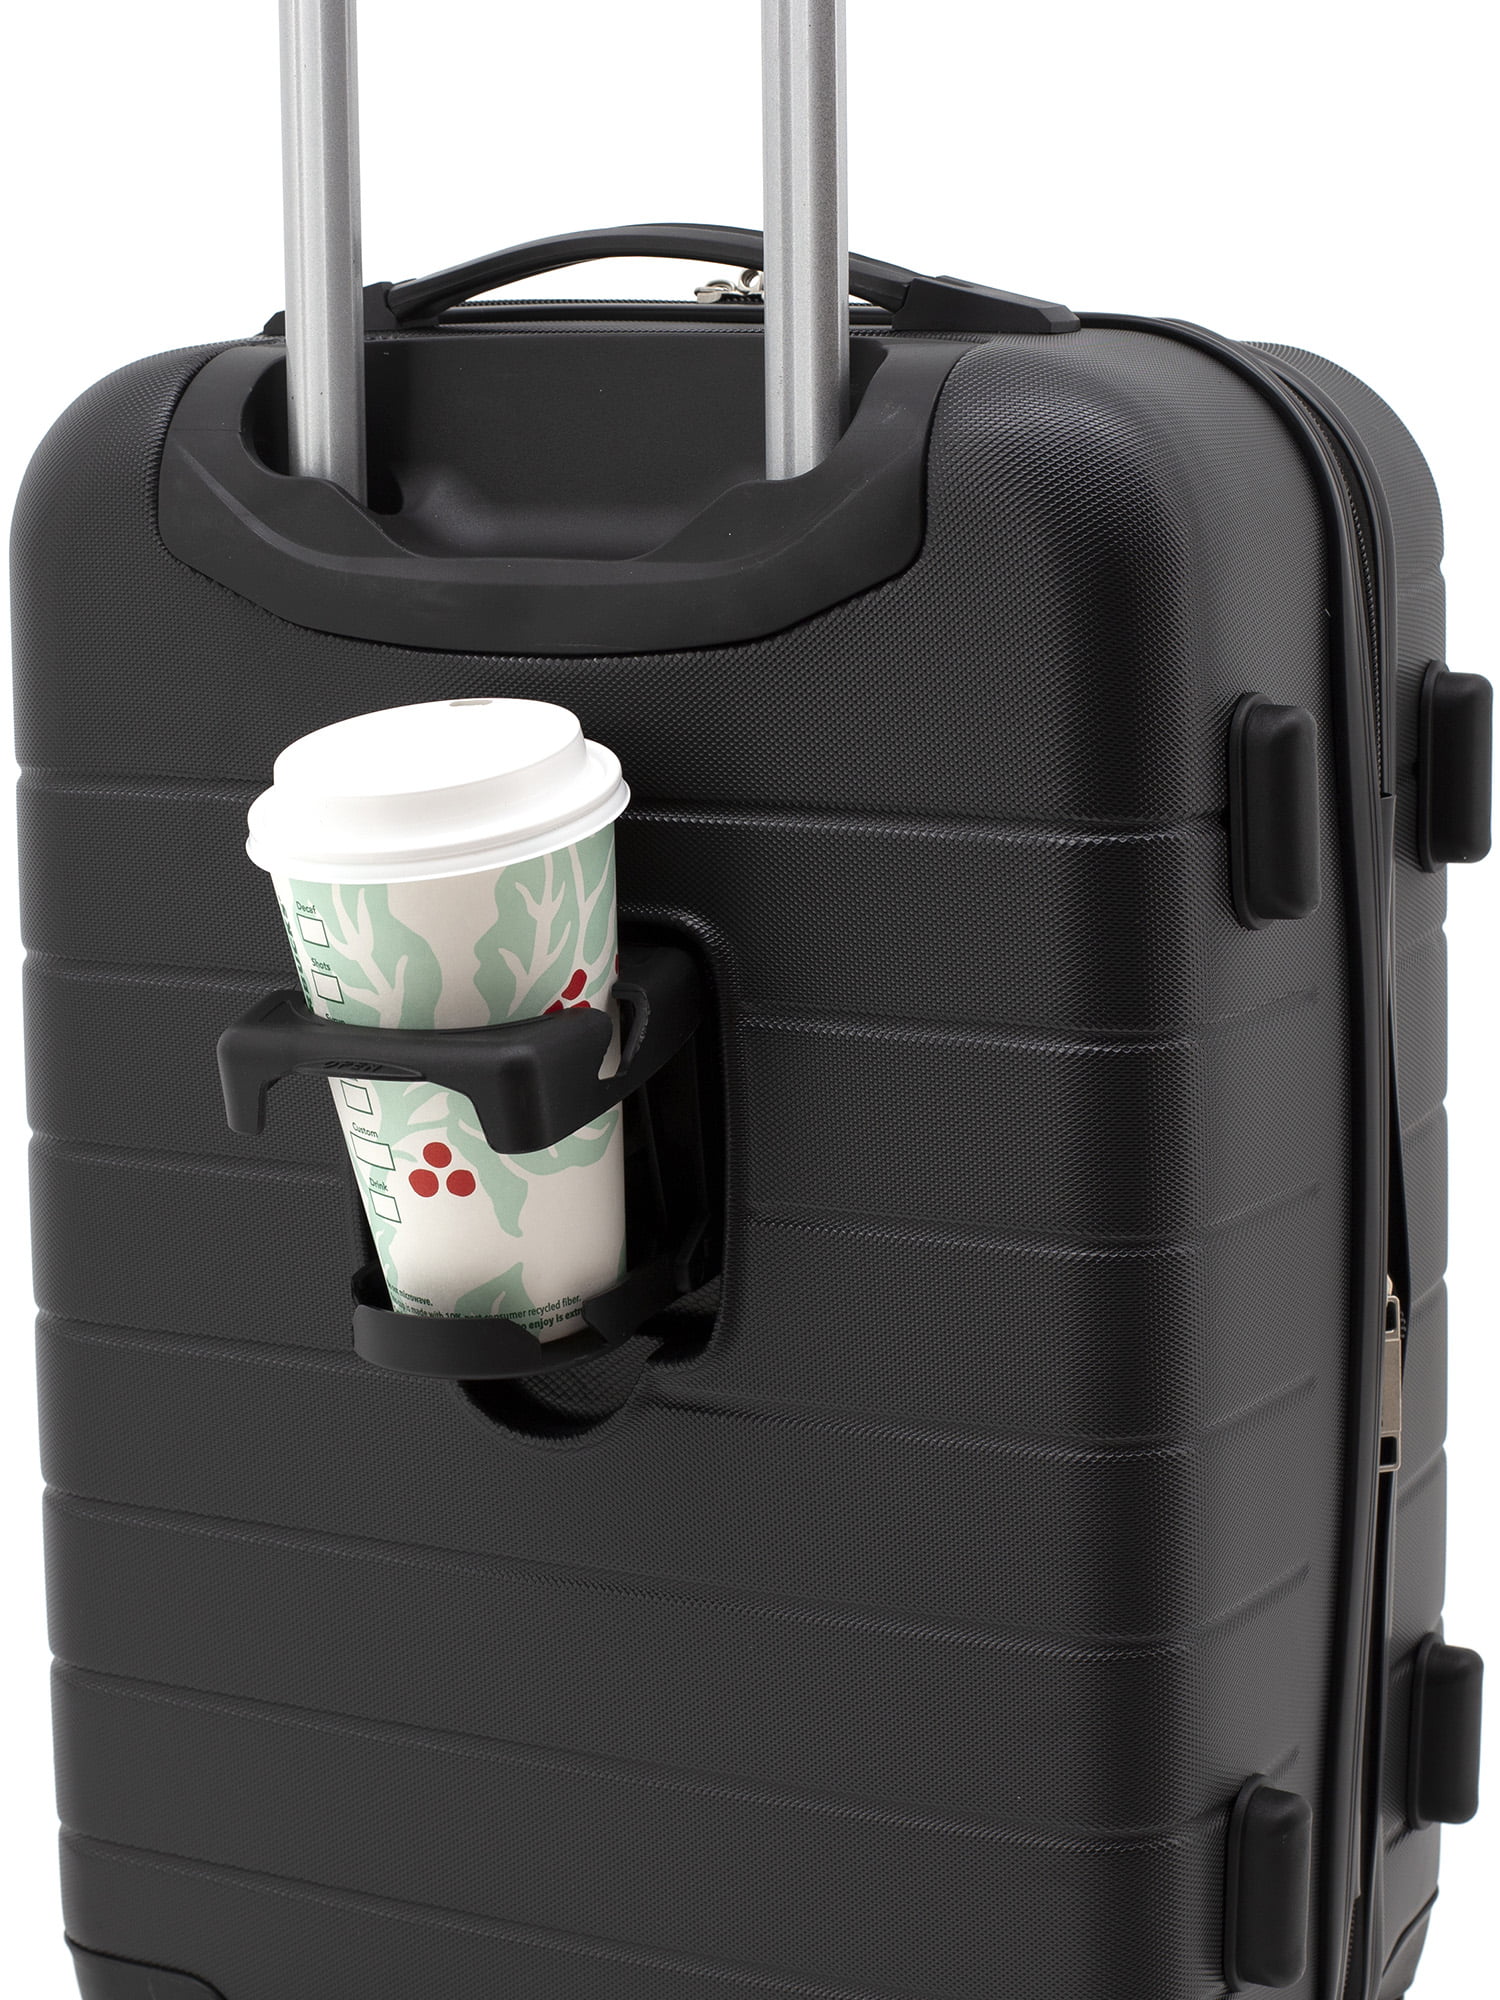 Shop 20 inch Suitcases with USB,Cup Holder Tr – Luggage Factory